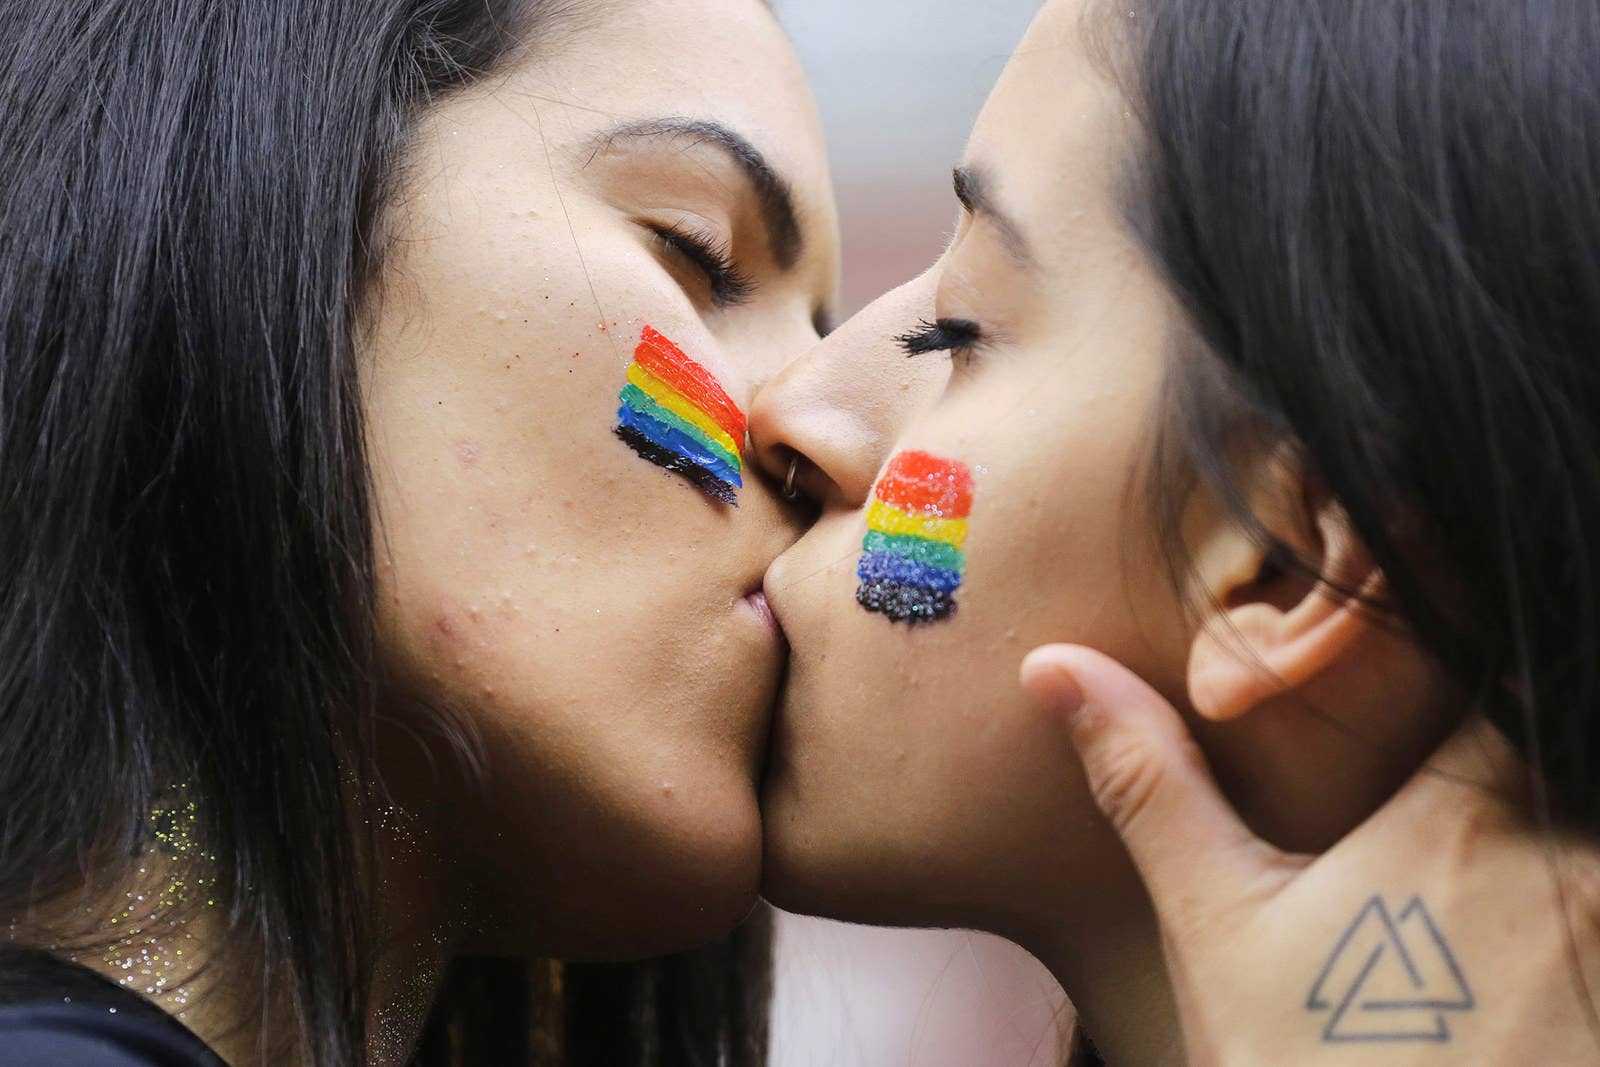 Revelers kiss during the annual gay pride parade in Sao Paulo, Brazil, on J...